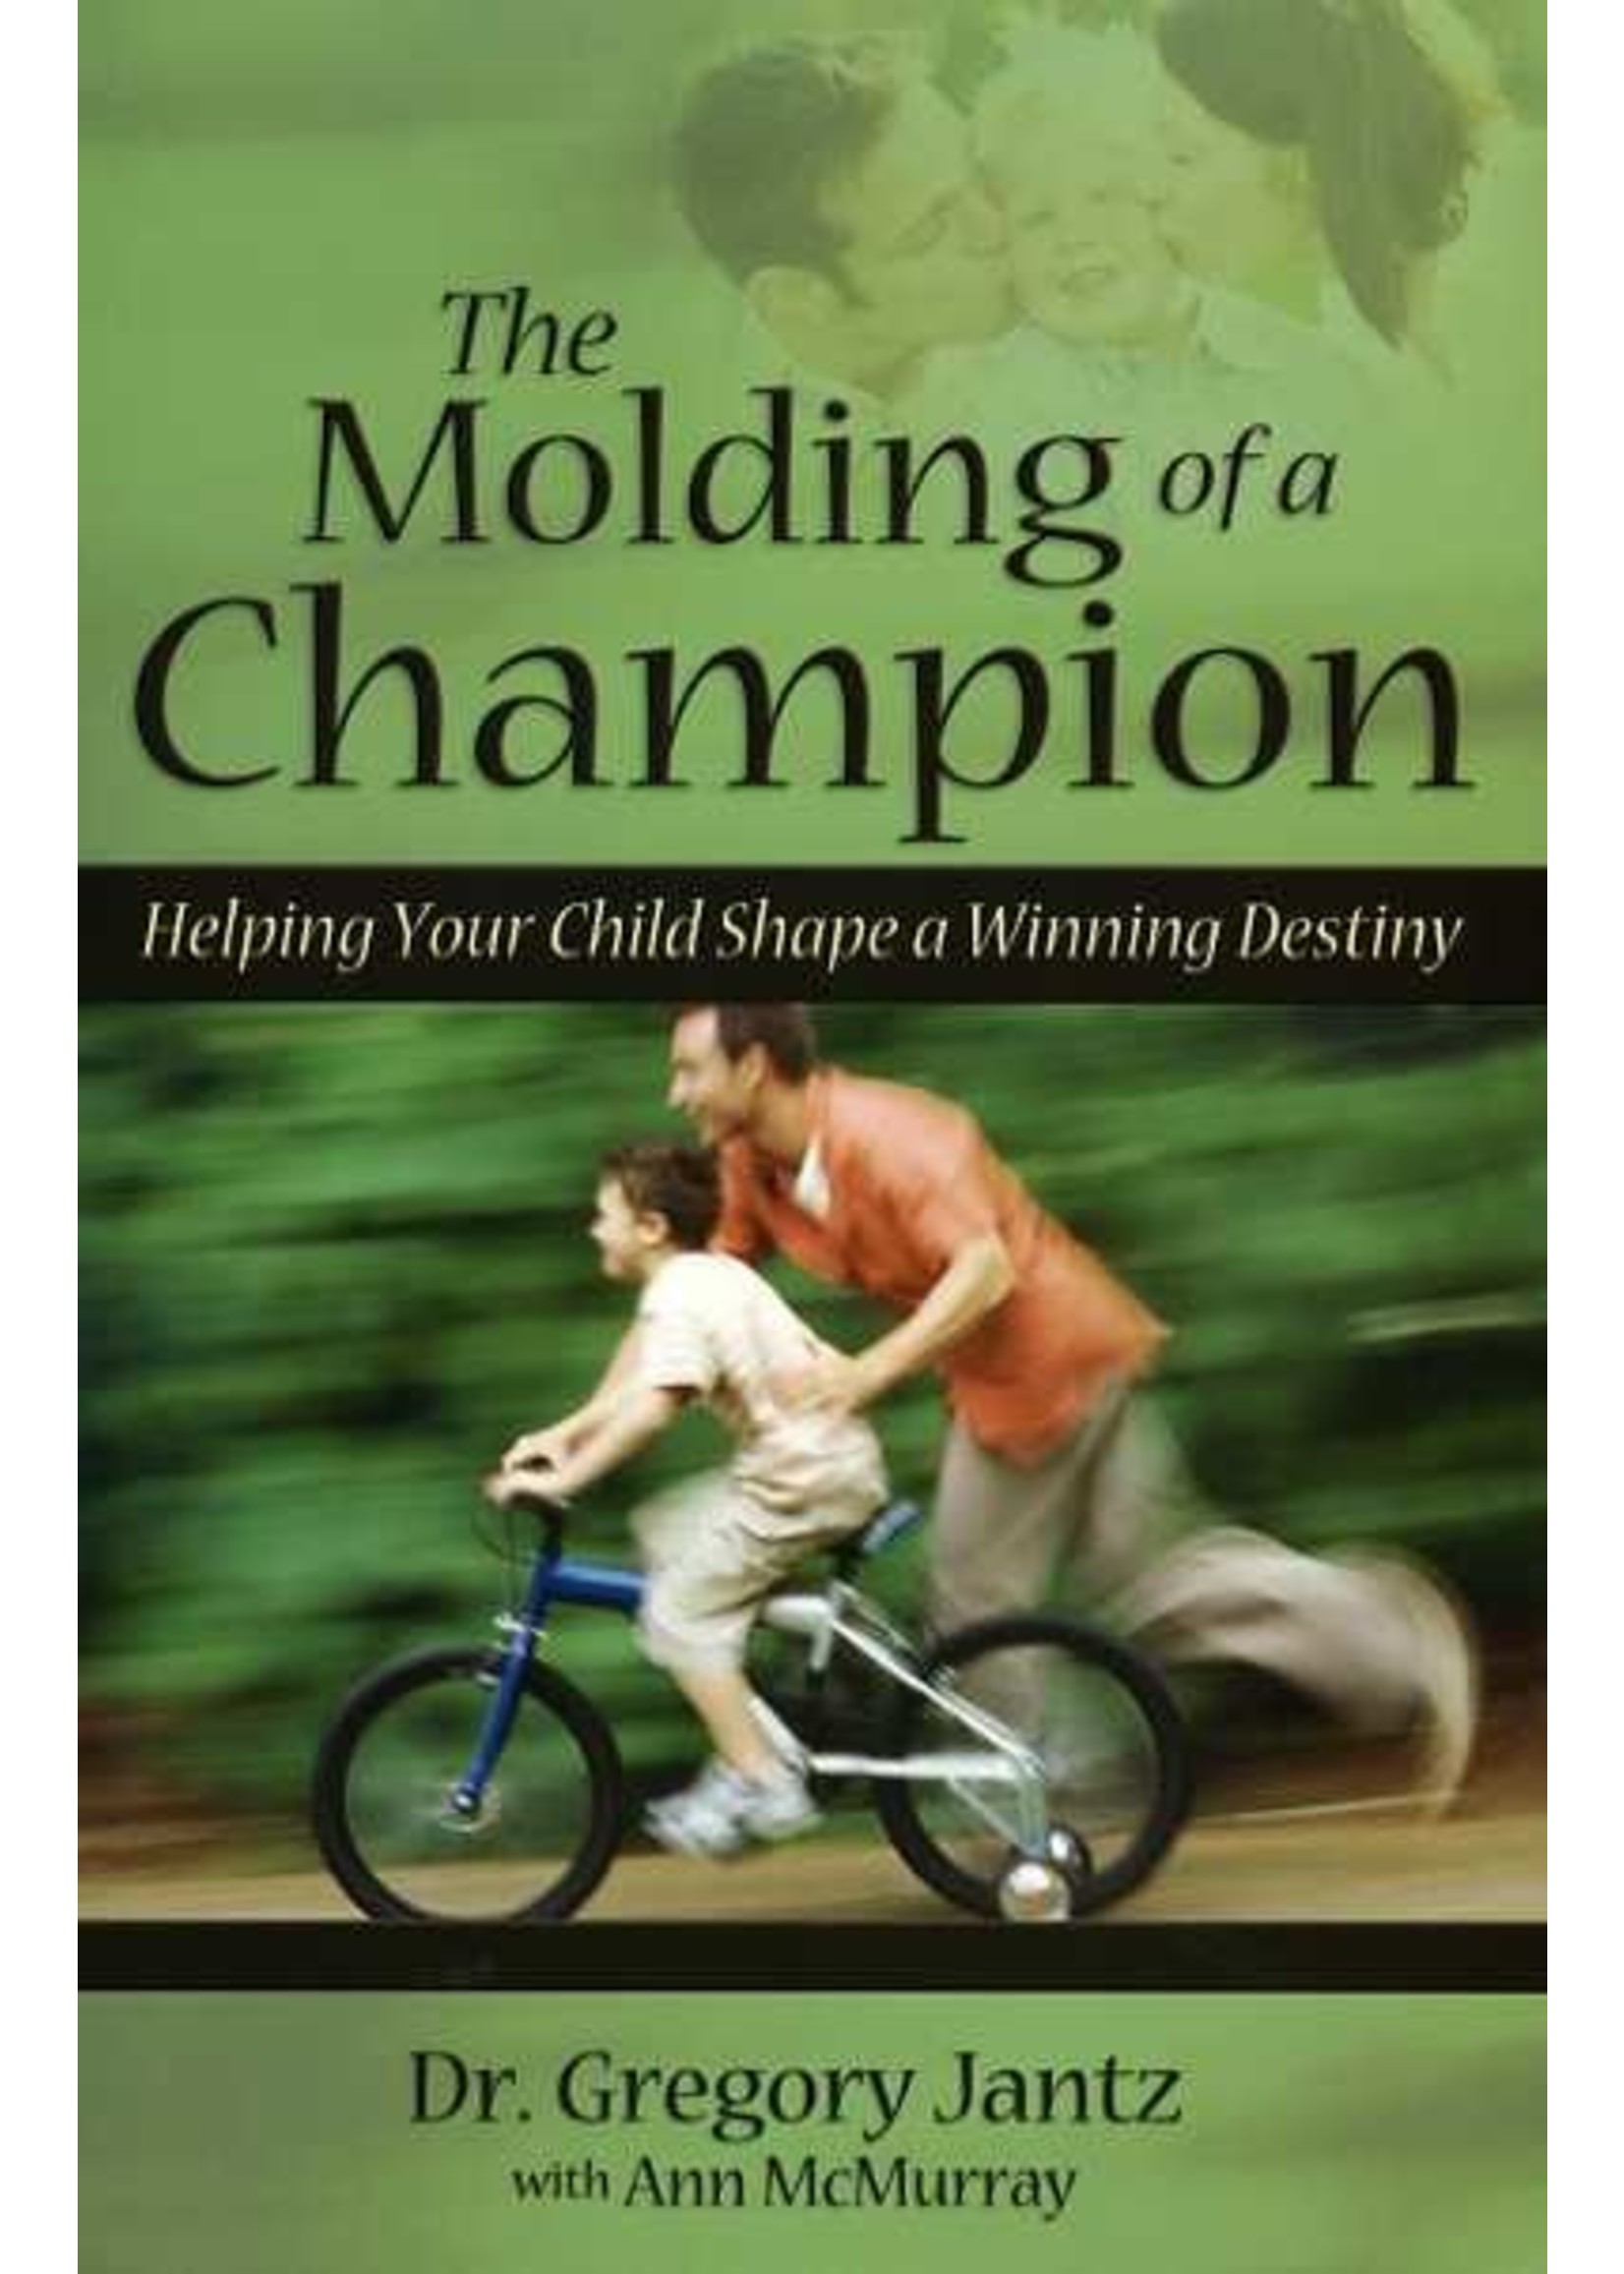 The Molding of a Champion - Gregory Jantz